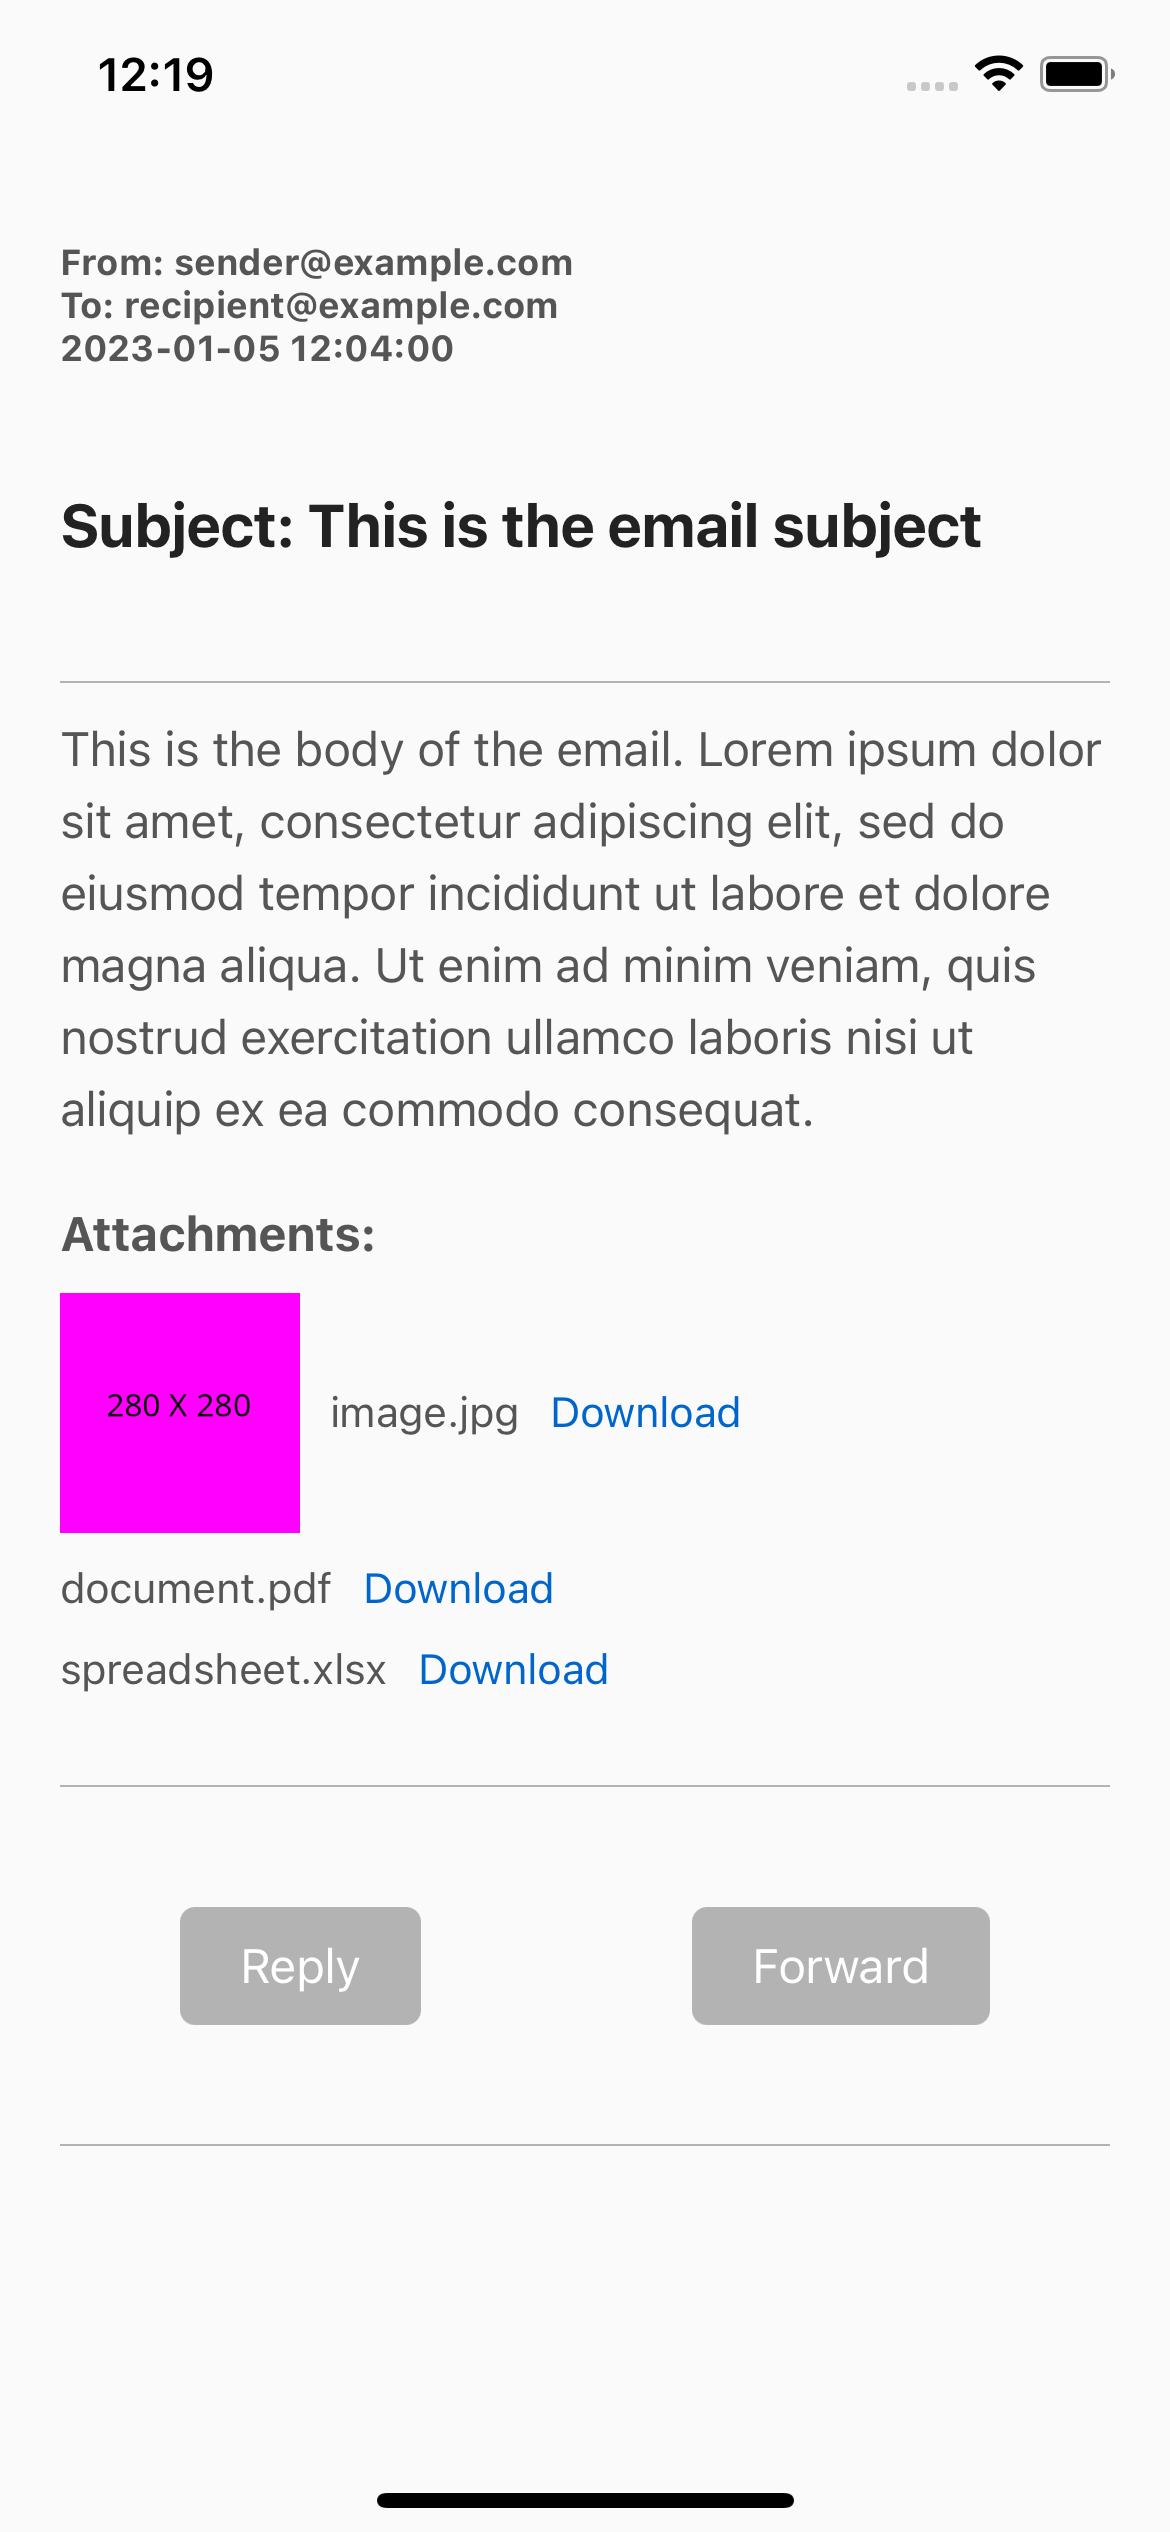 React native template. View email